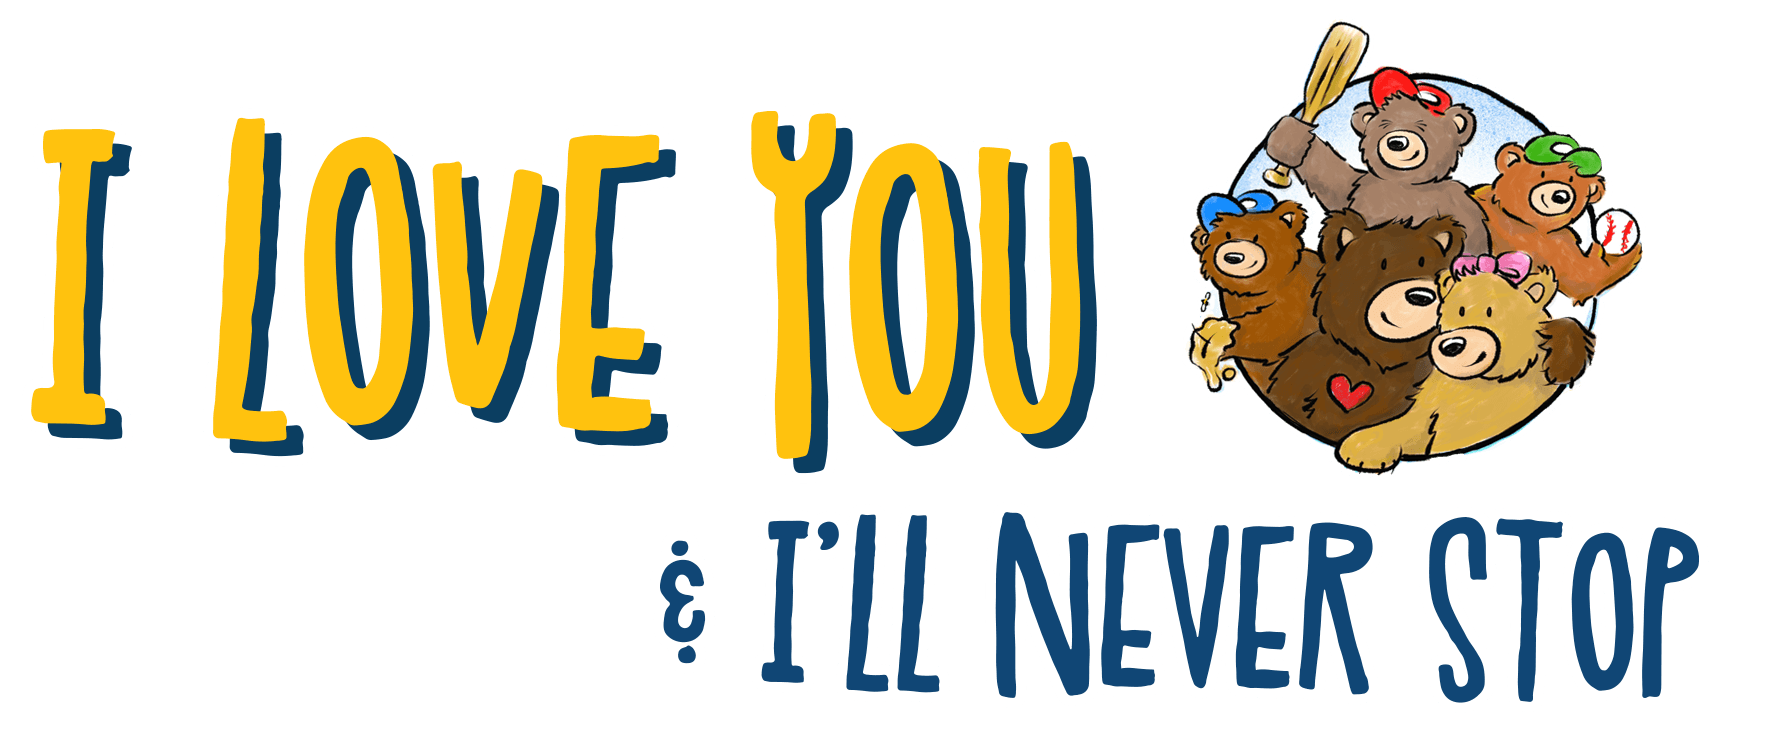 I Love You & I'll Never Stop TItle Logo